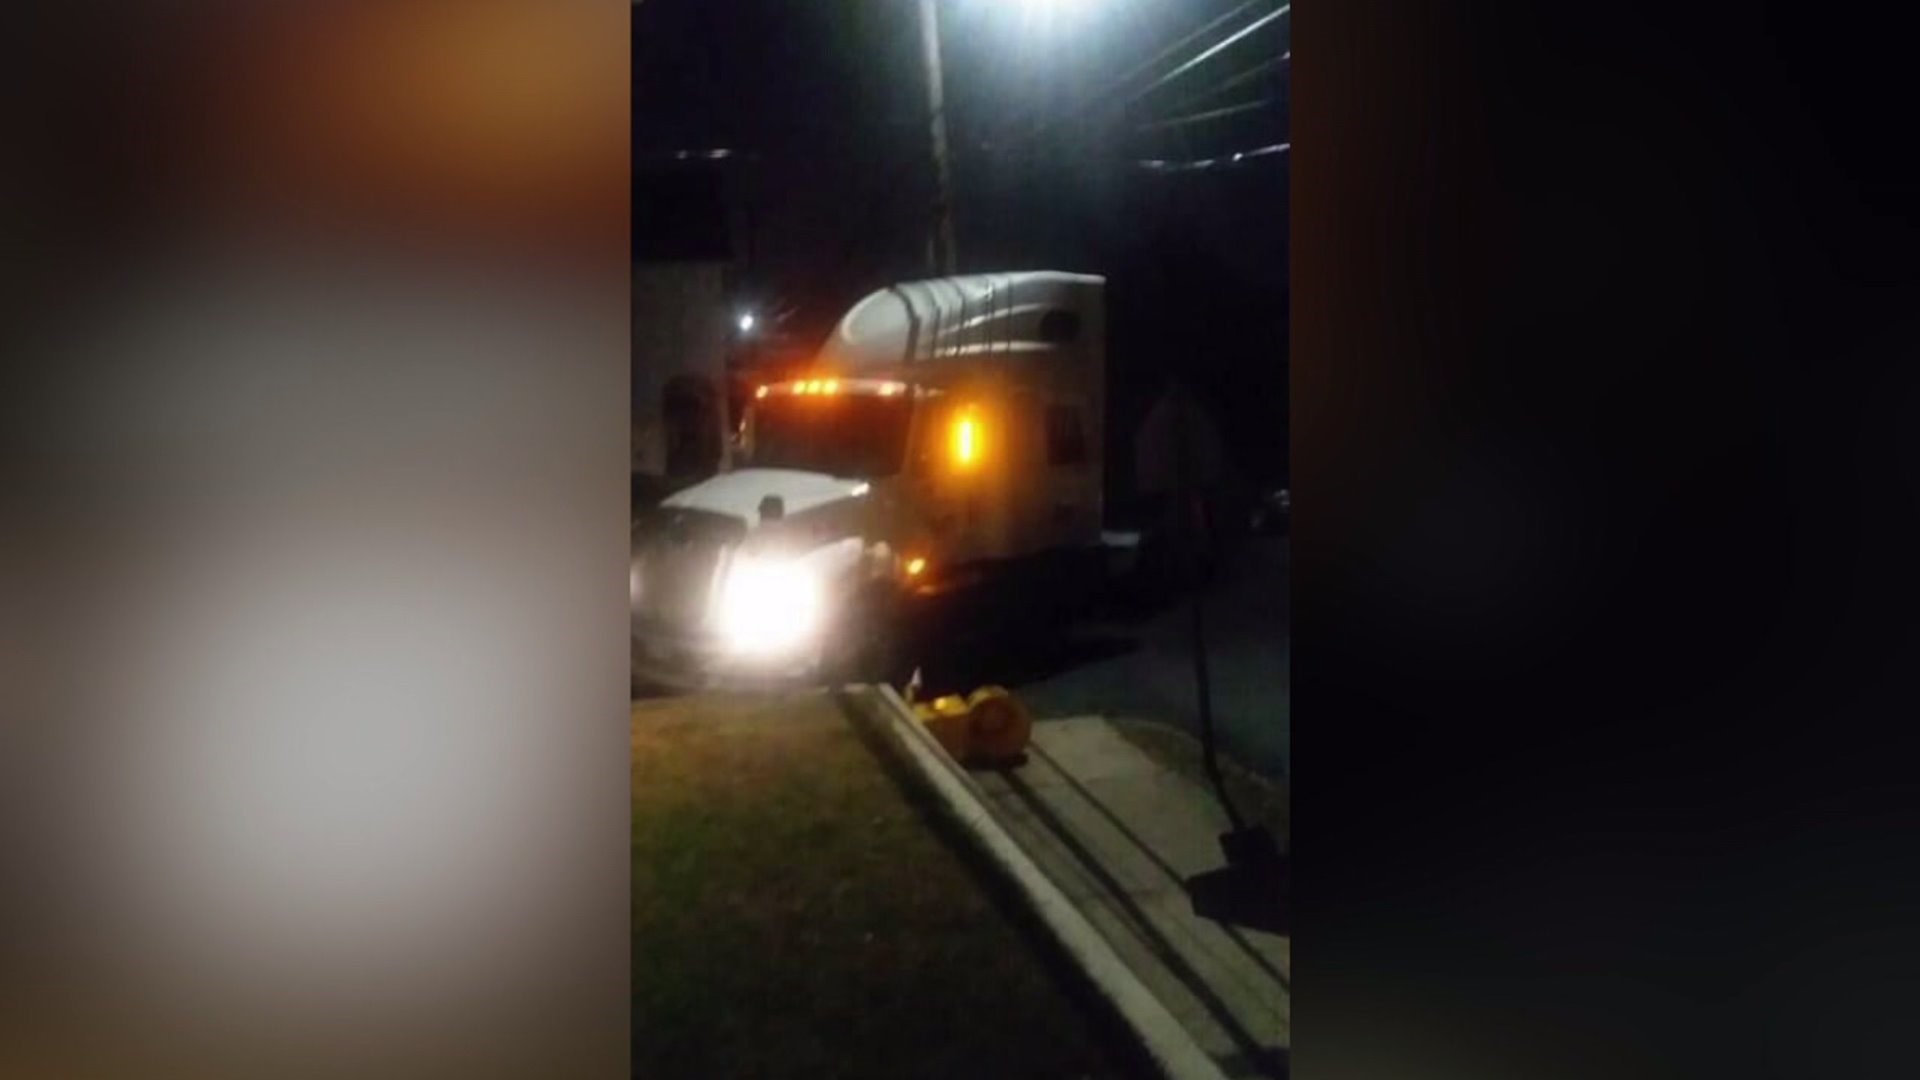 Police: Drunk Driver Smashes Tractor Trailer Cab with Babies Inside